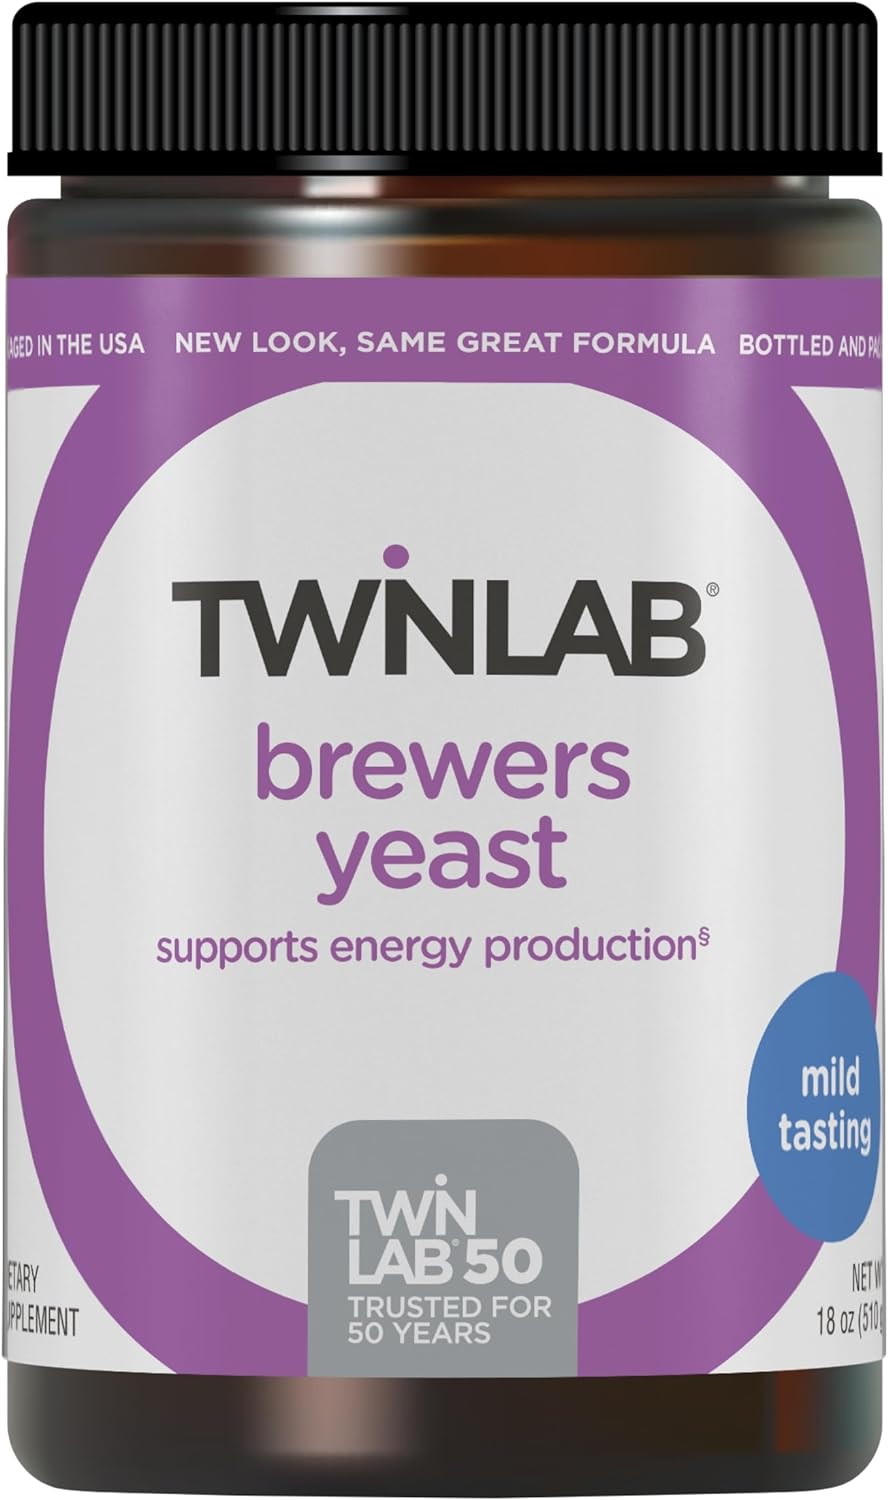 Twinlab Brewers Yeast - with Vegan Protein, Vitamins, Minerals, Amino Acids, and Trace Elements - Men's and Women's Vitamins with Nutritional Brewers Yeast - 18 oz